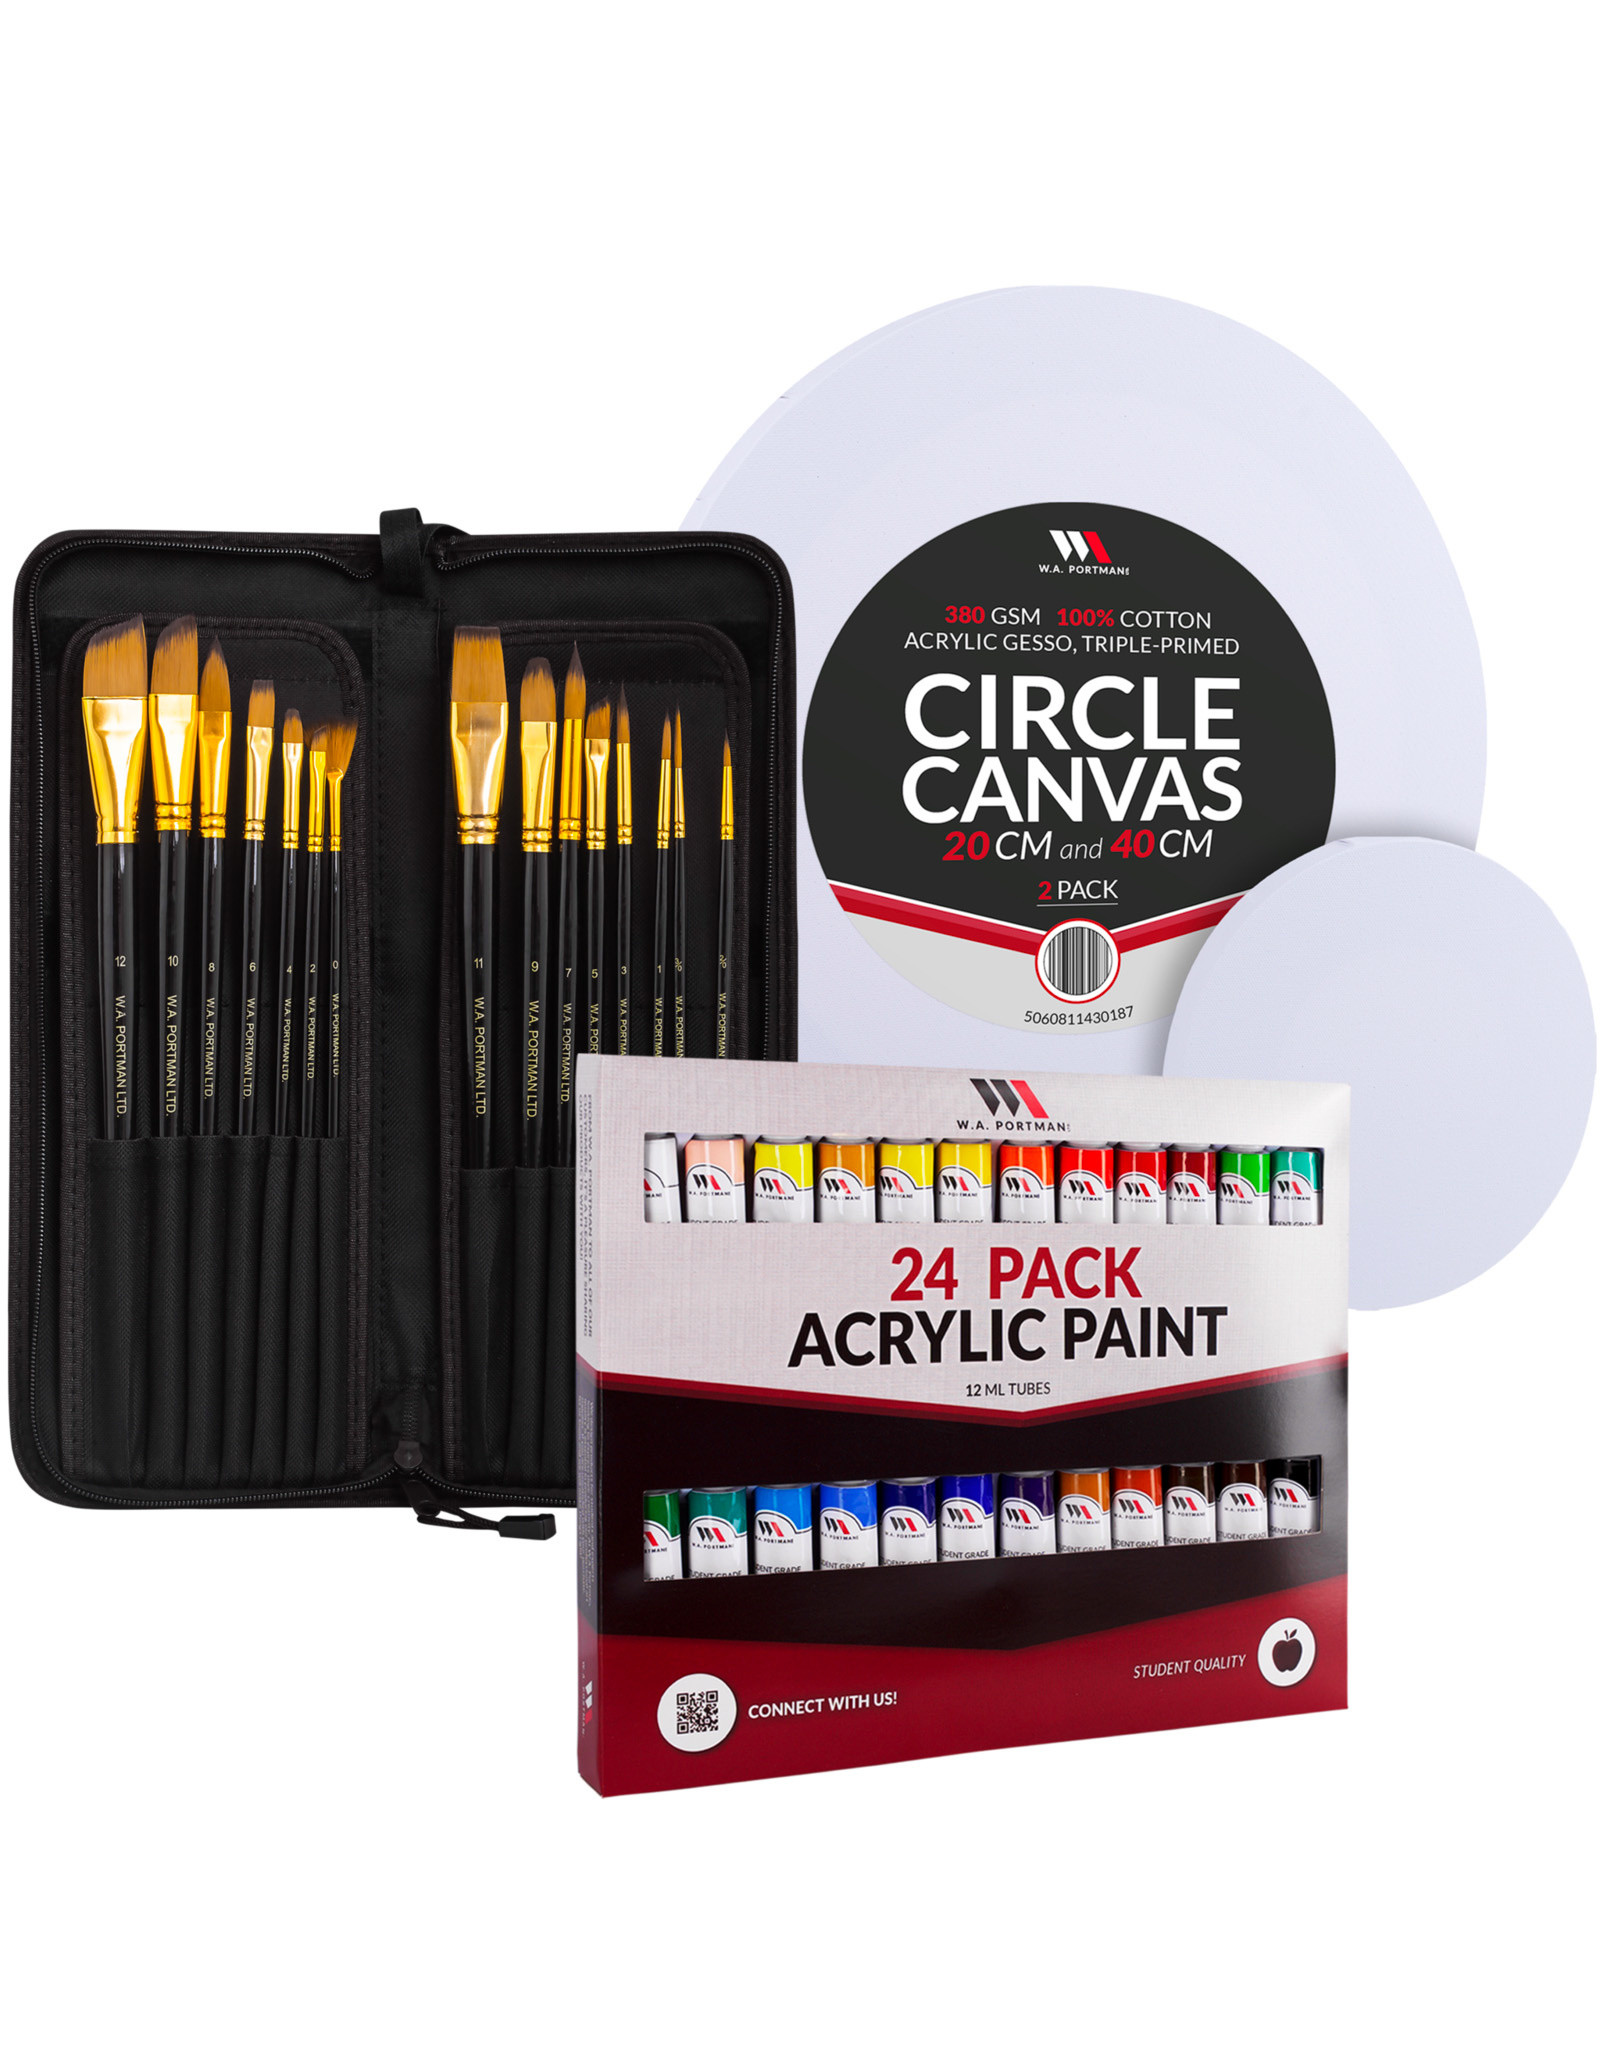 WA Portman Circle Canvas Painting Kit - The Art Store/Commercial Art Supply